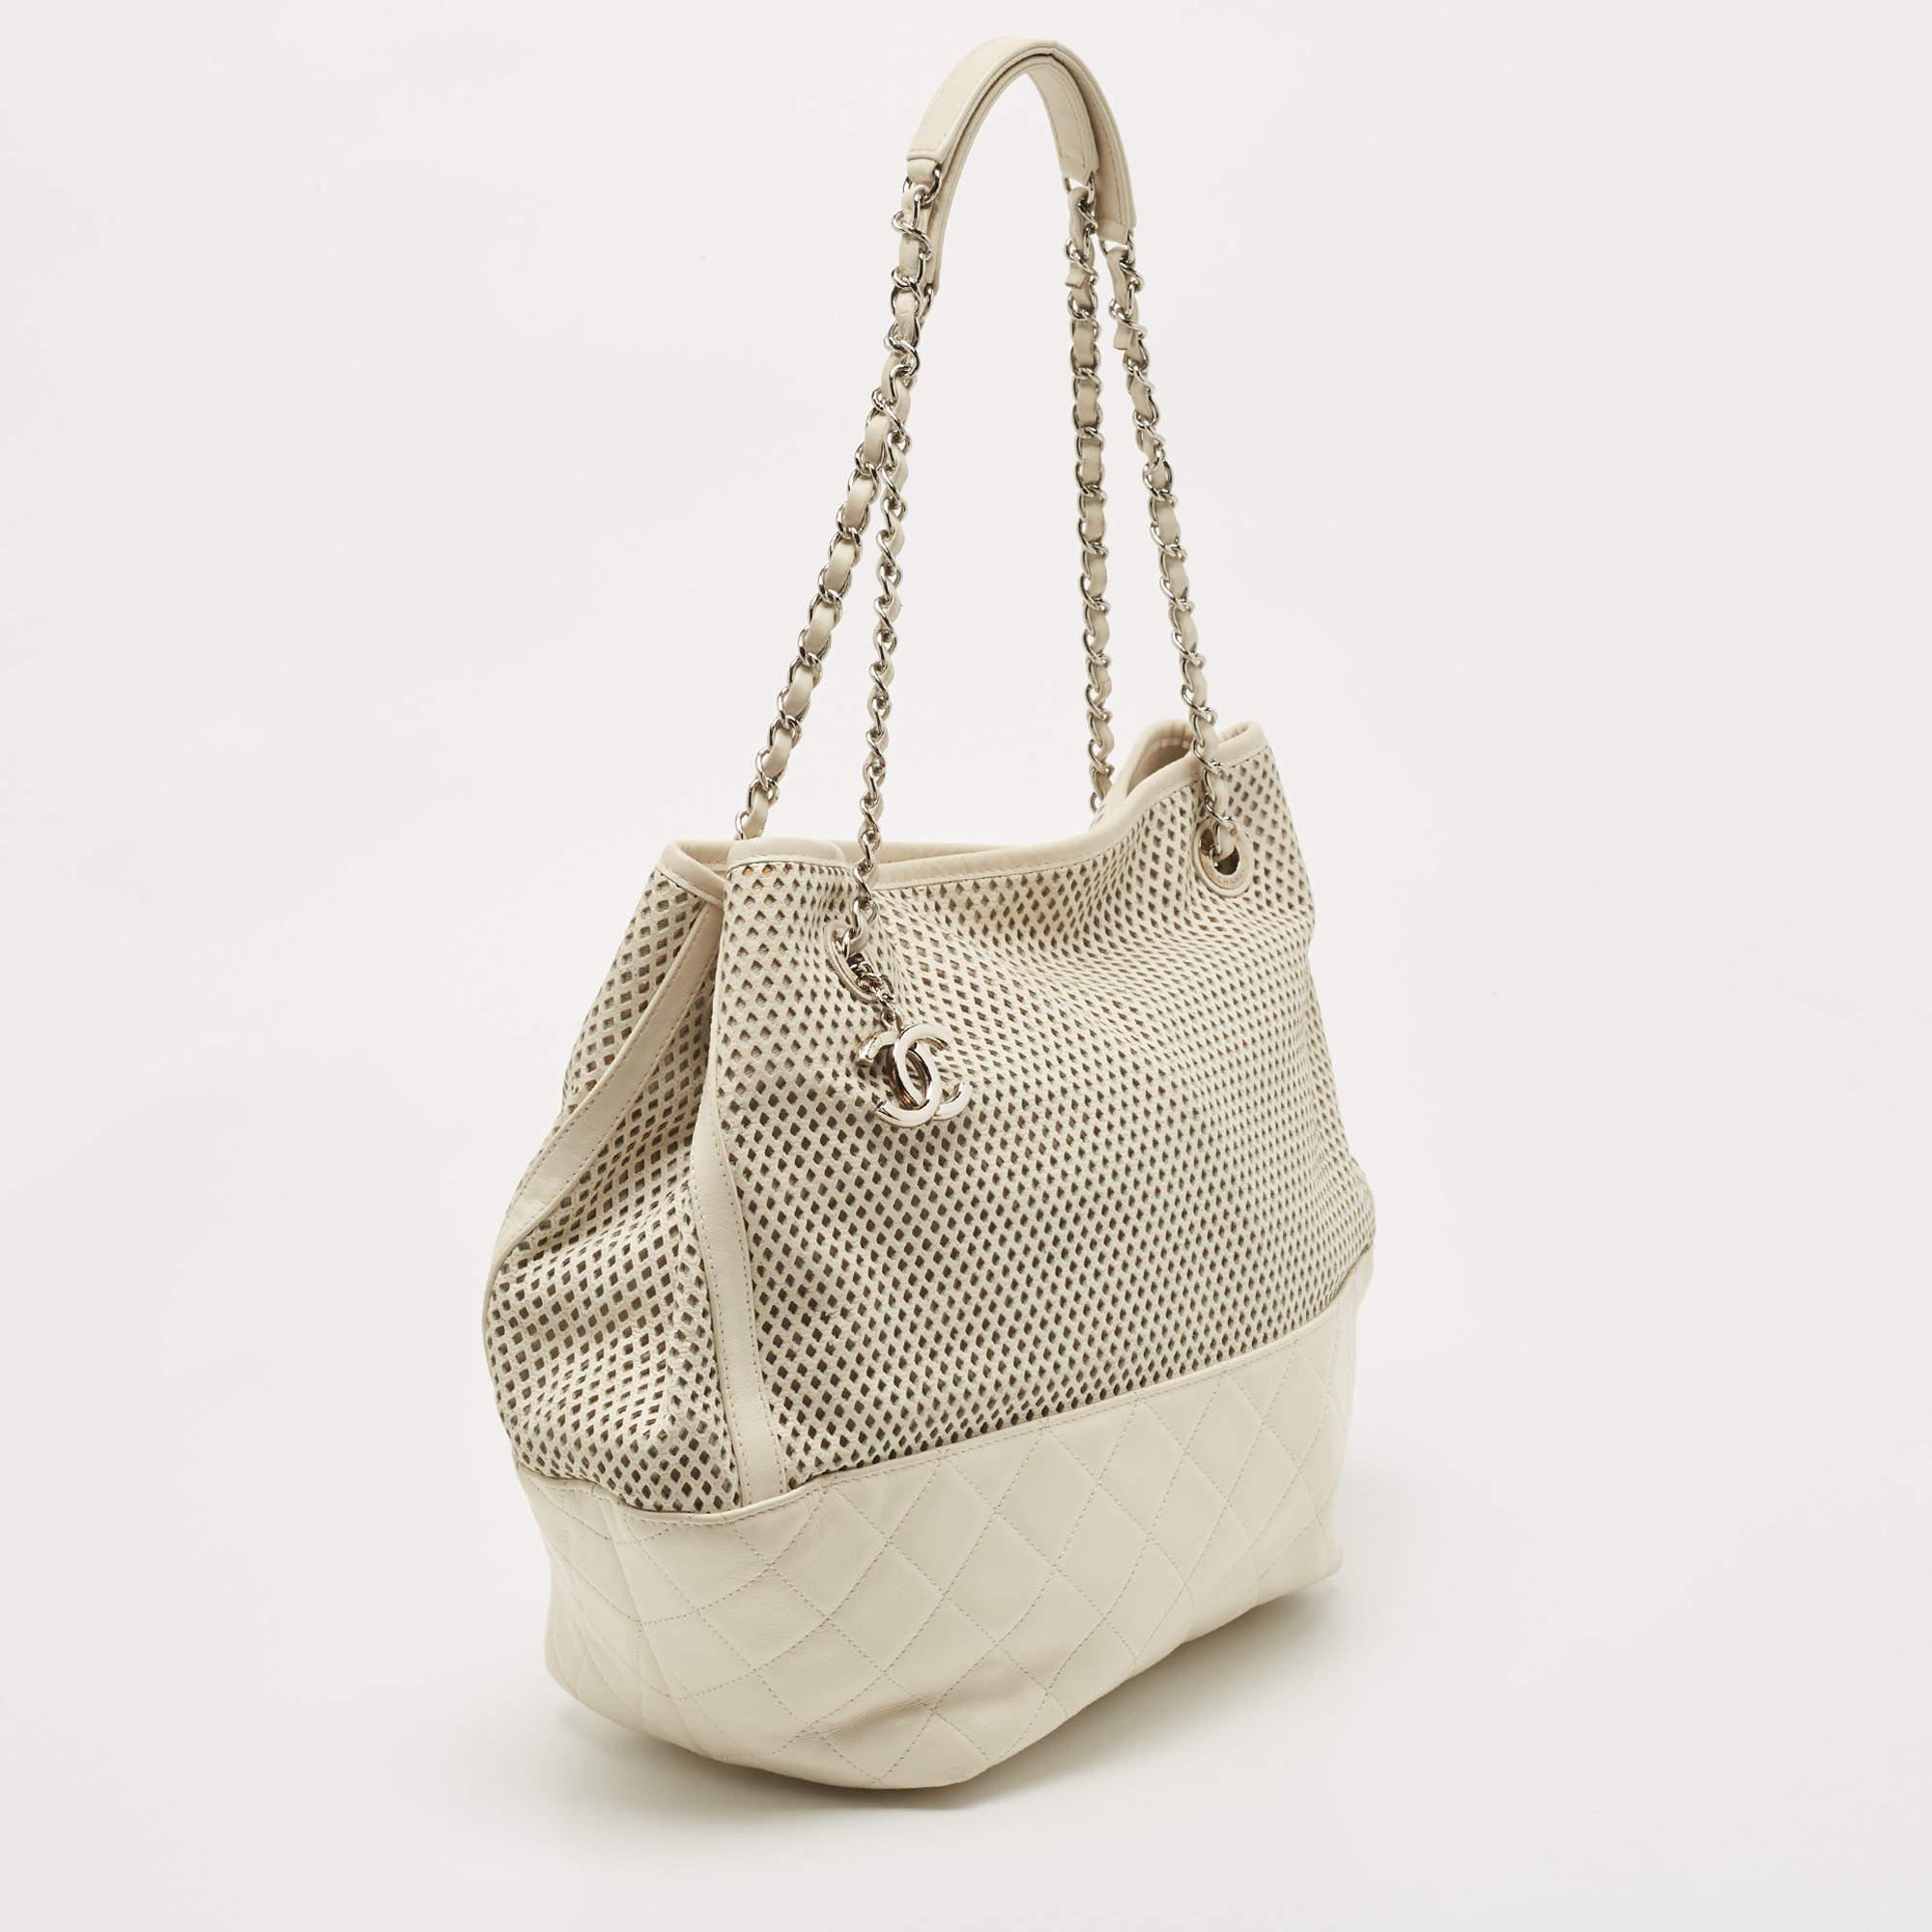 Women's Chanel Cream Perforated Leather Up In The Air Tote